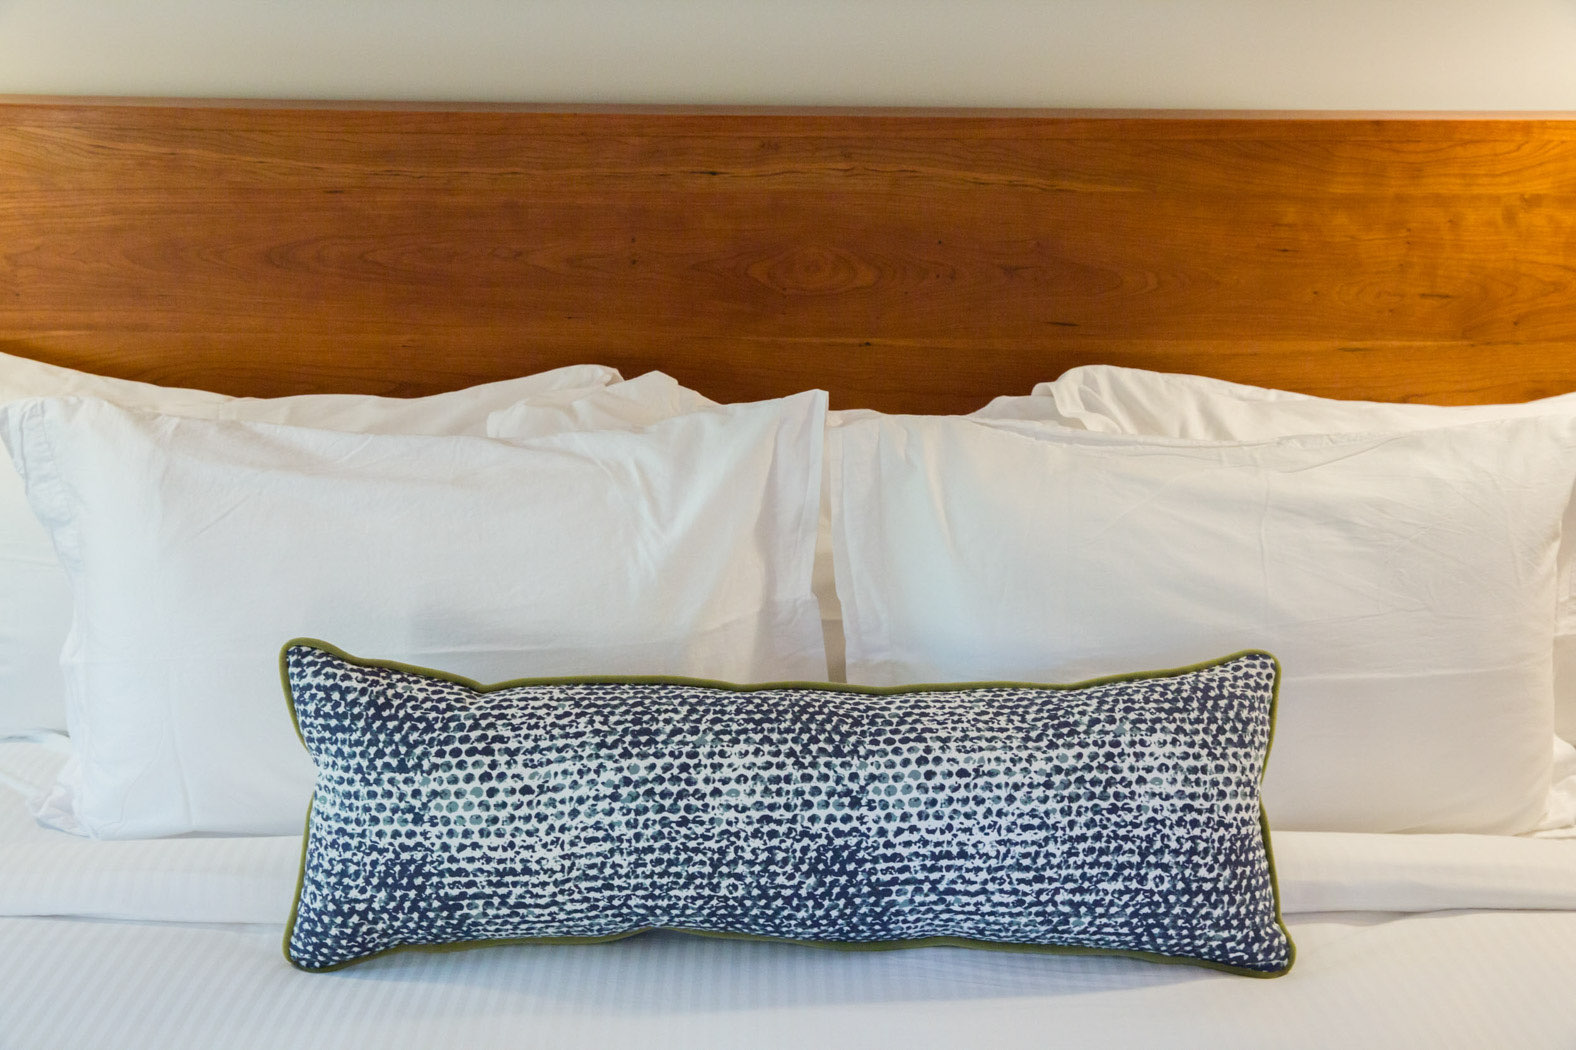 close up of pillows on bed 